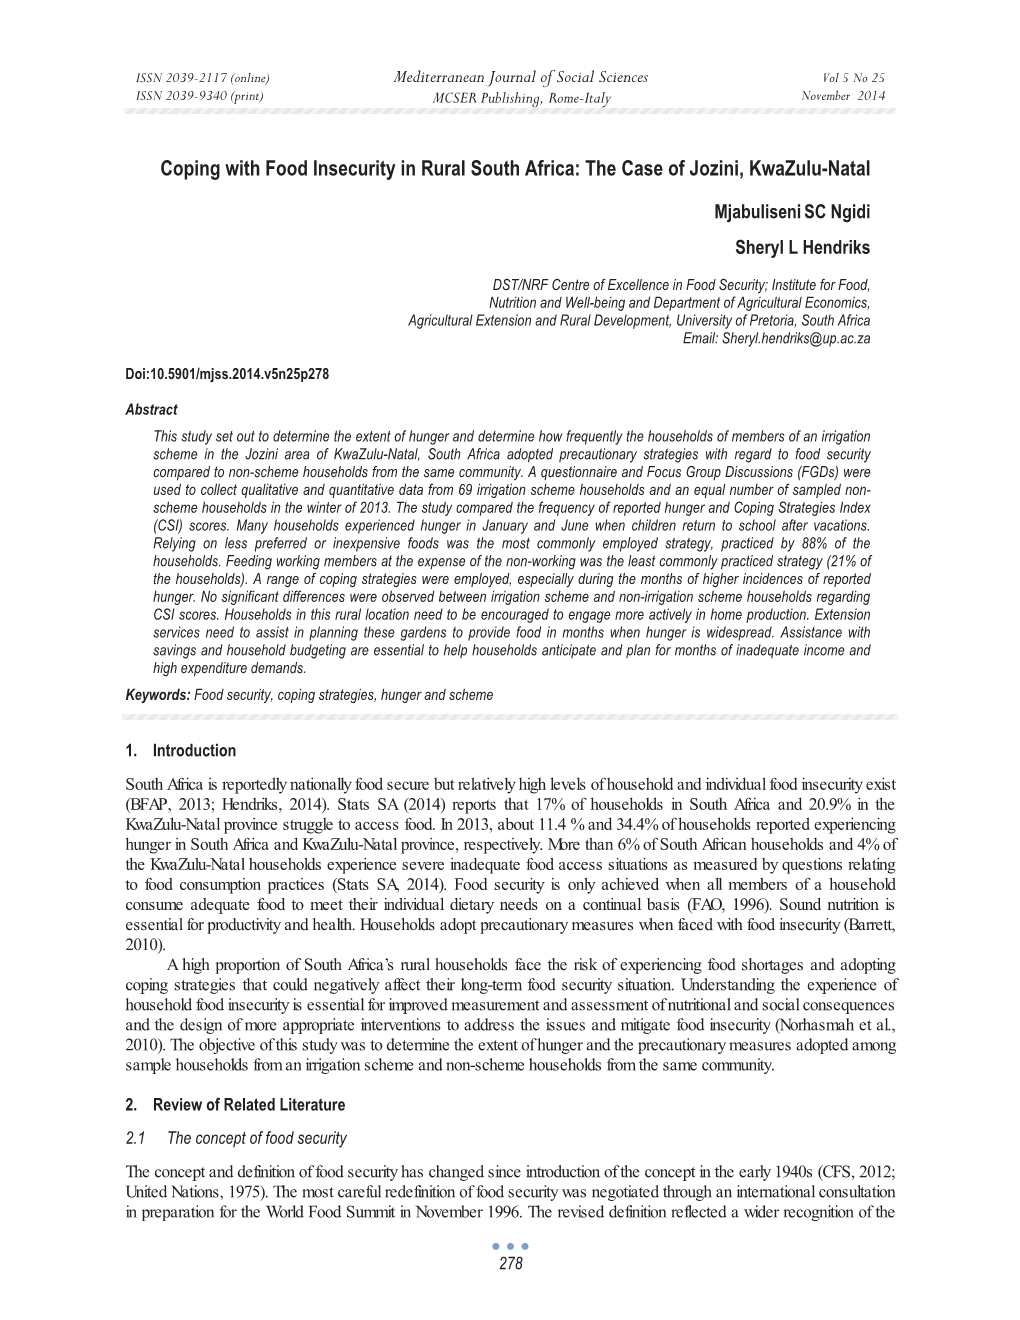 Coping with Food Insecurity in Rural South Africa: the Case of Jozini, Kwazulu-Natal